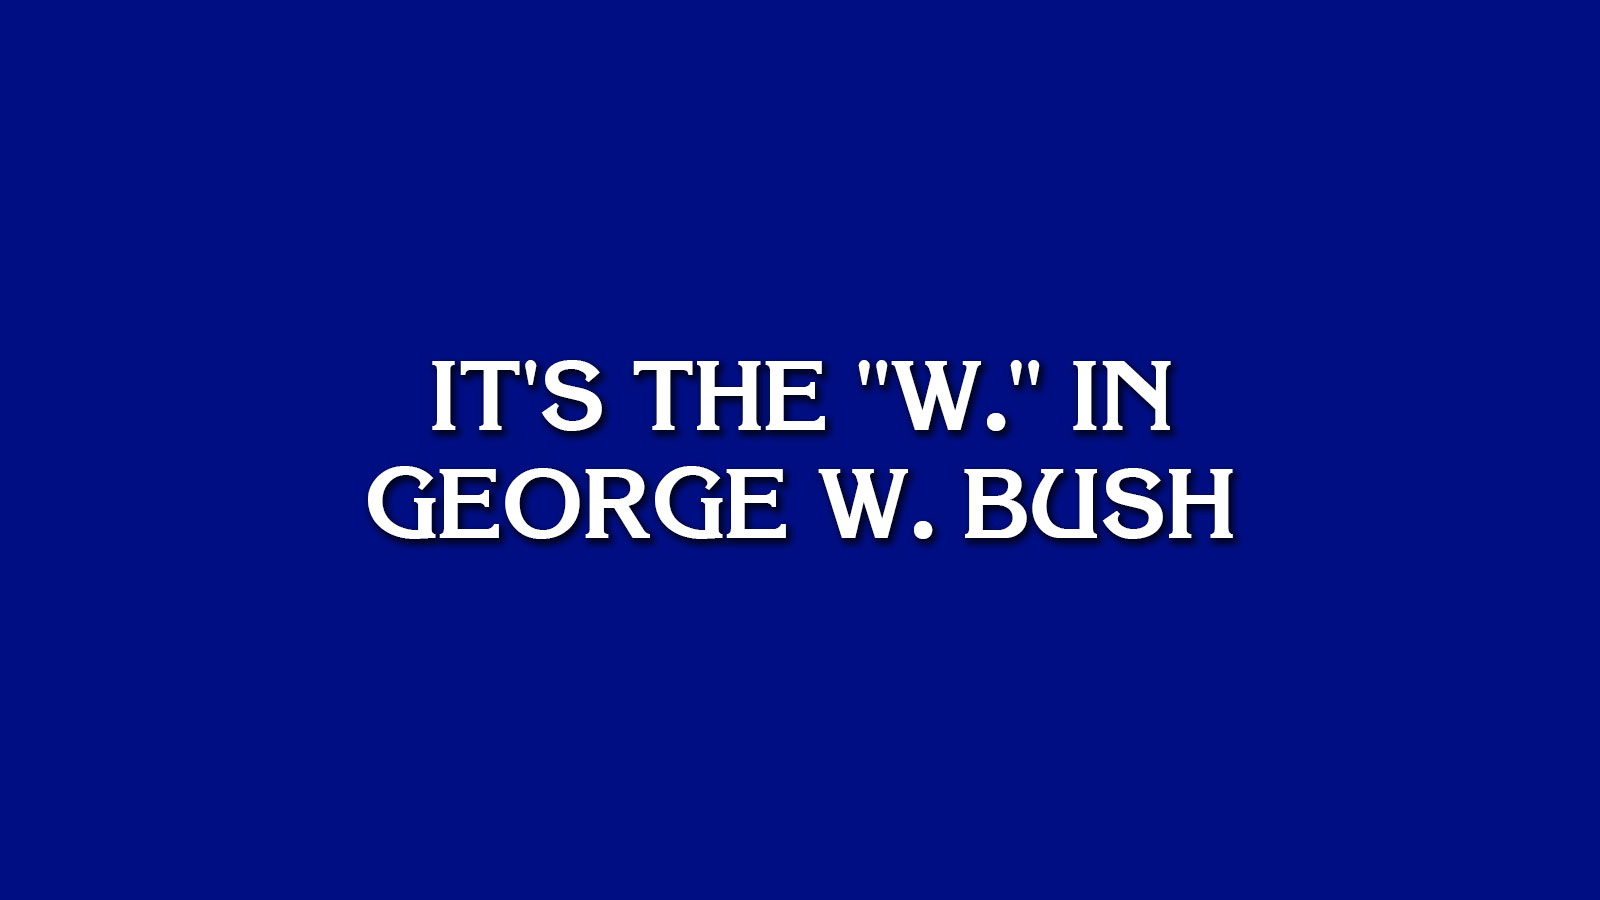 Can You Beat an Easy Game of “Jeopardy!”? 1116